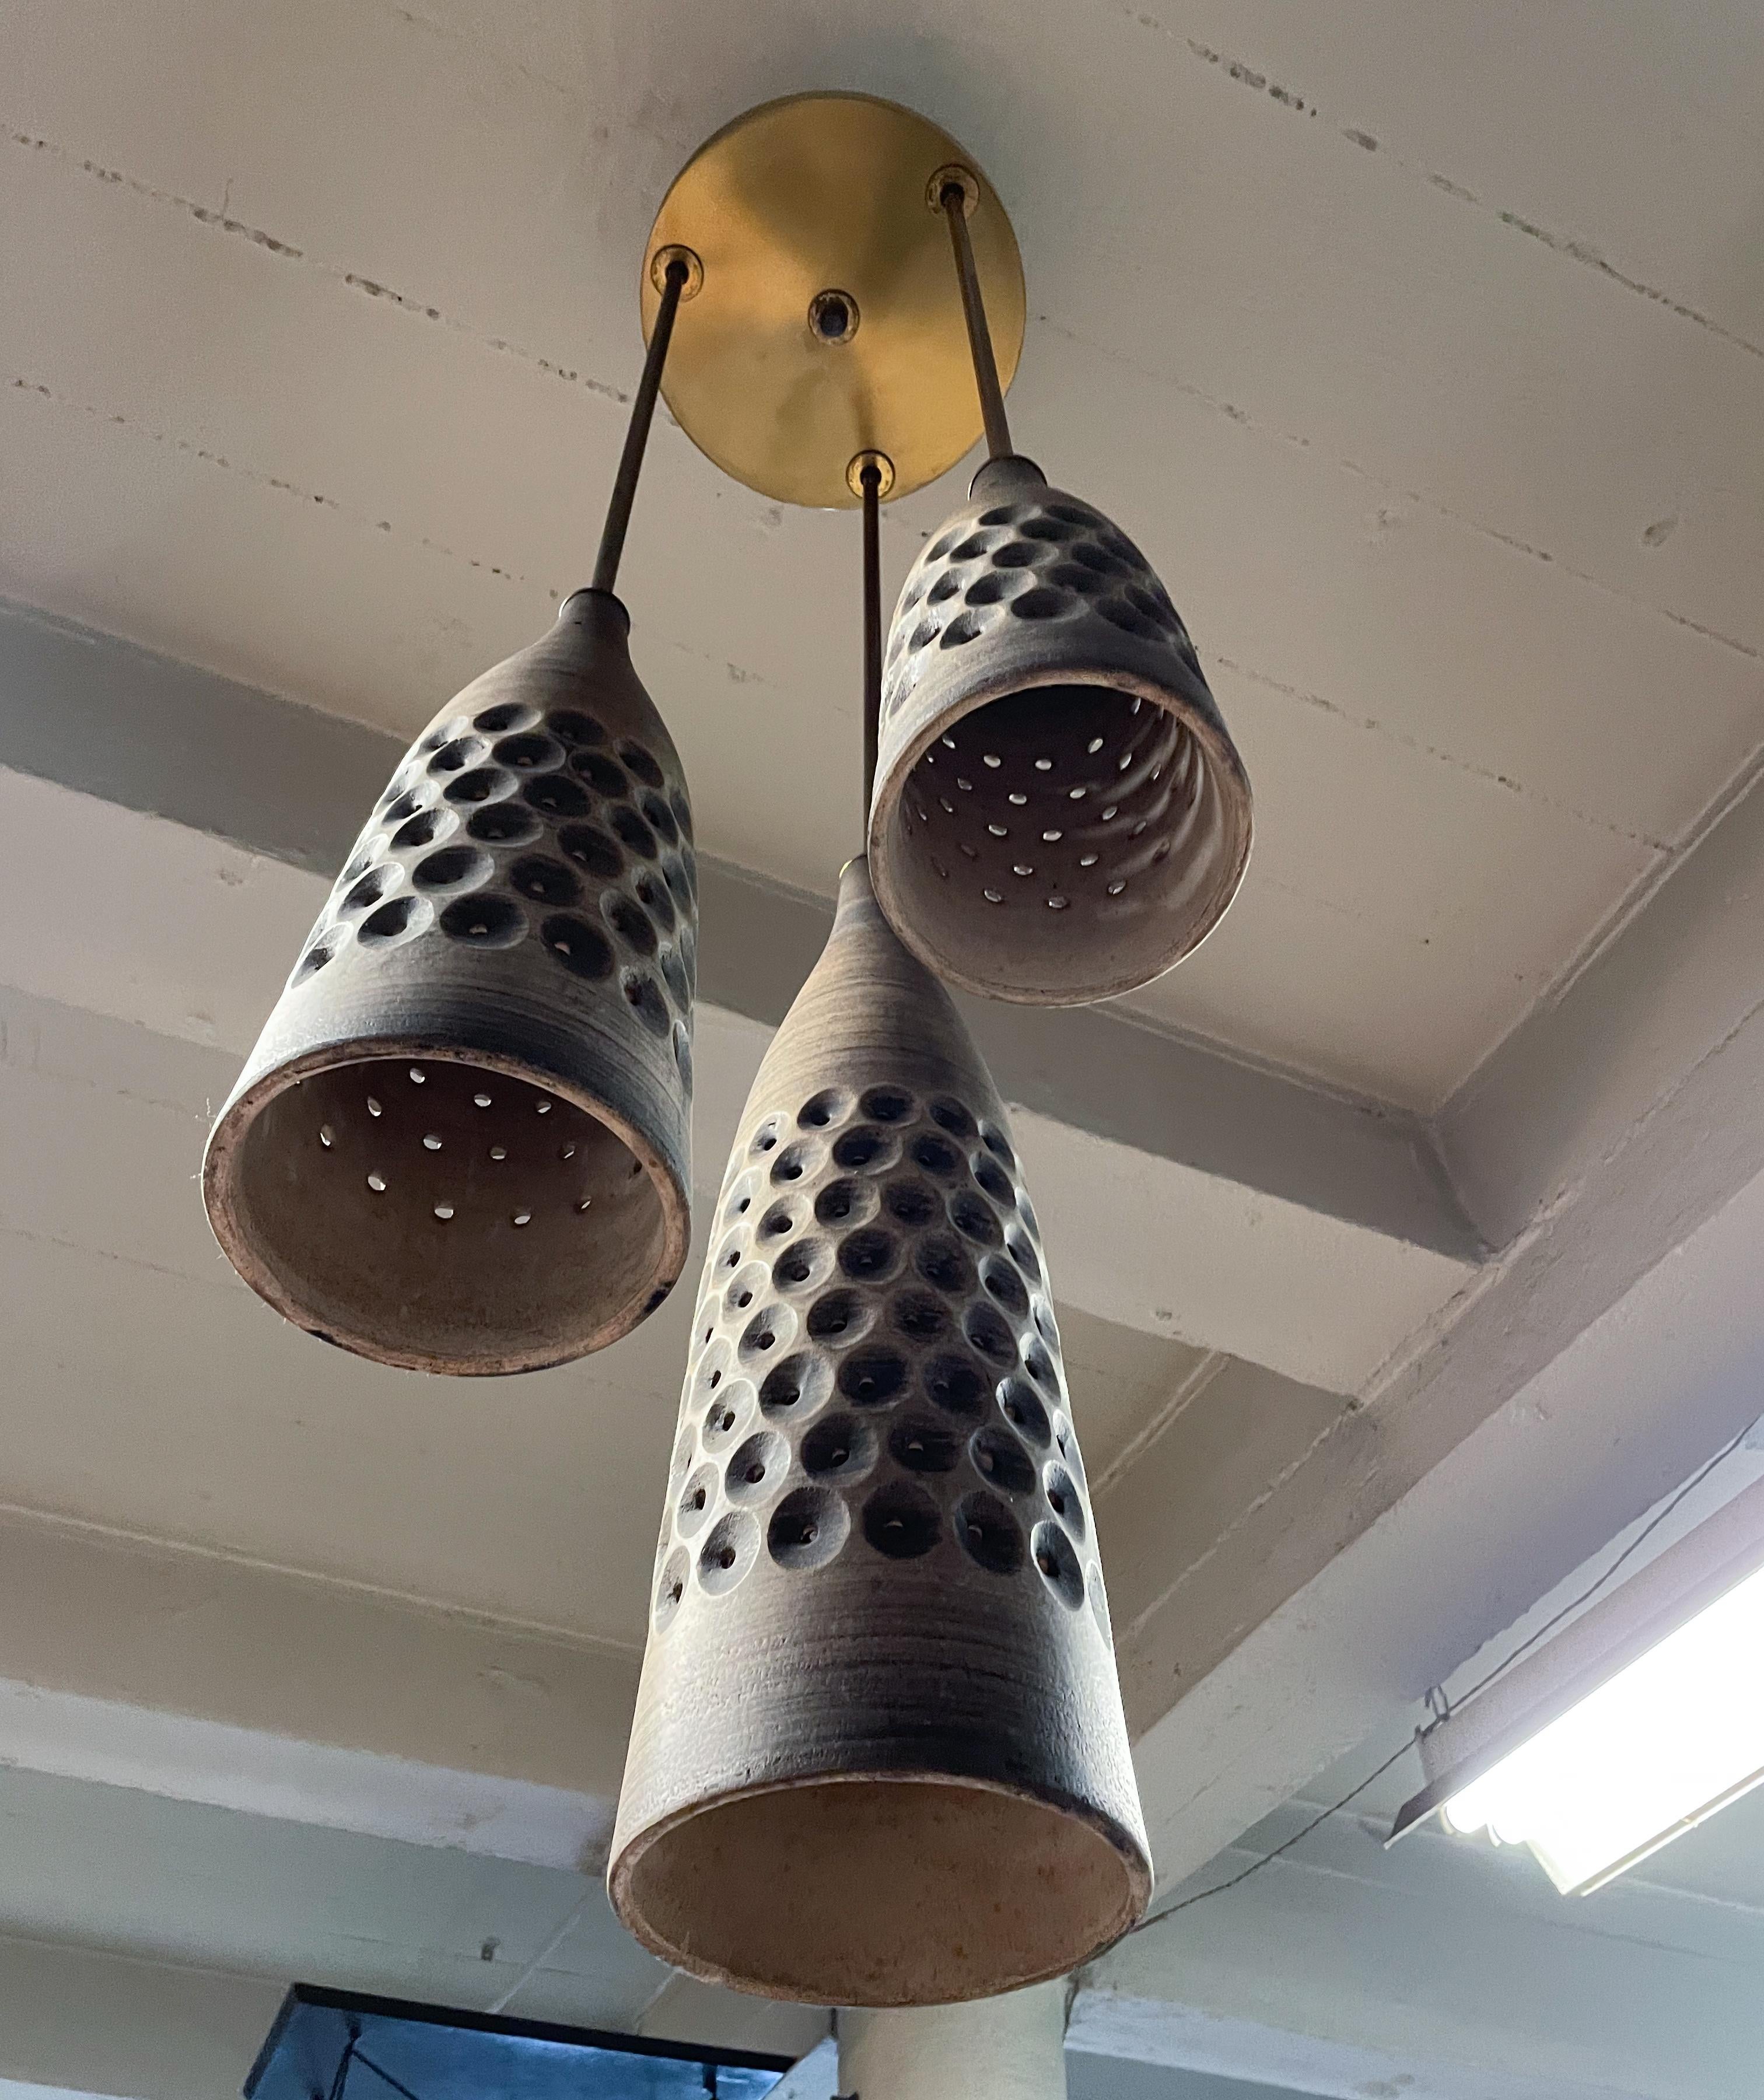 Lee Rosen Ceramic Spiral Pendant Fixture for Design Technics In Good Condition For Sale In New York, NY